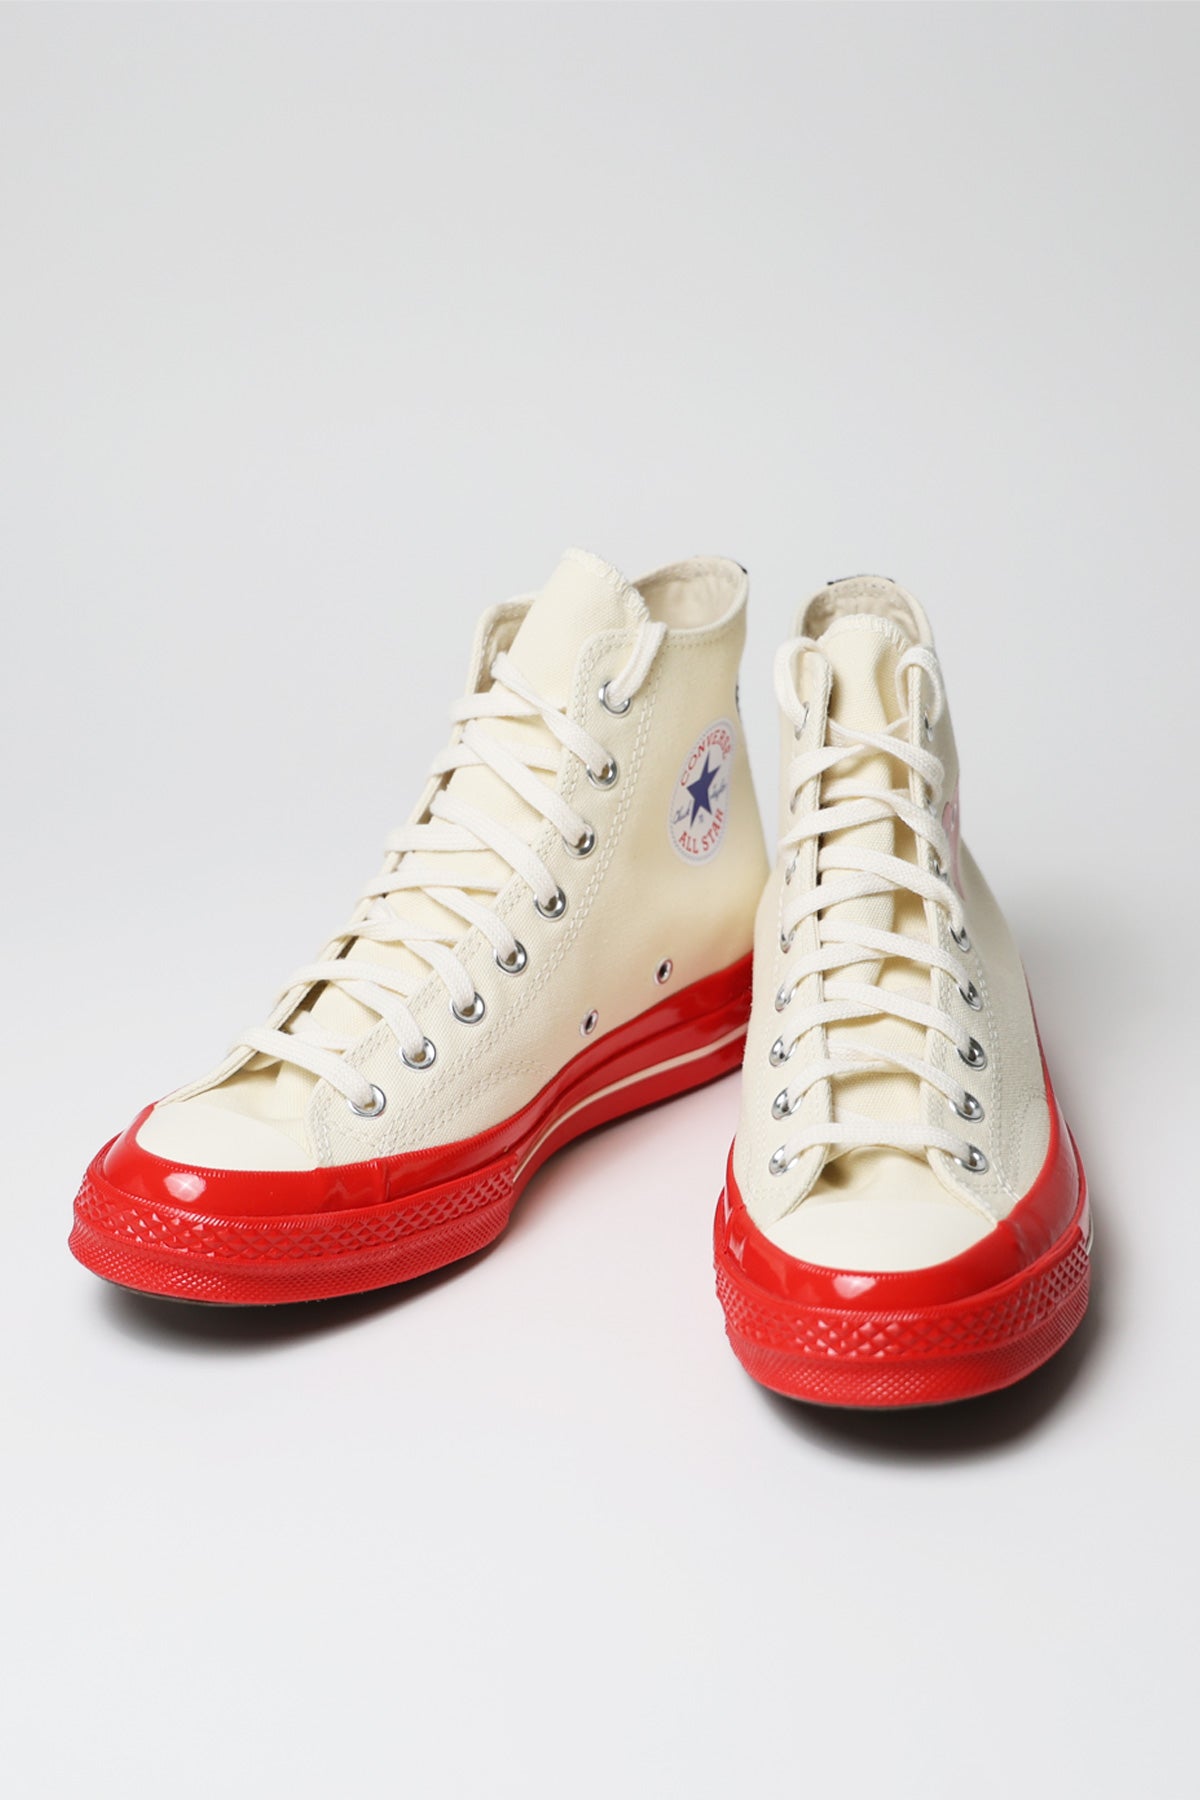 CdG PLAY x Converse Red Sole Hi - Off White